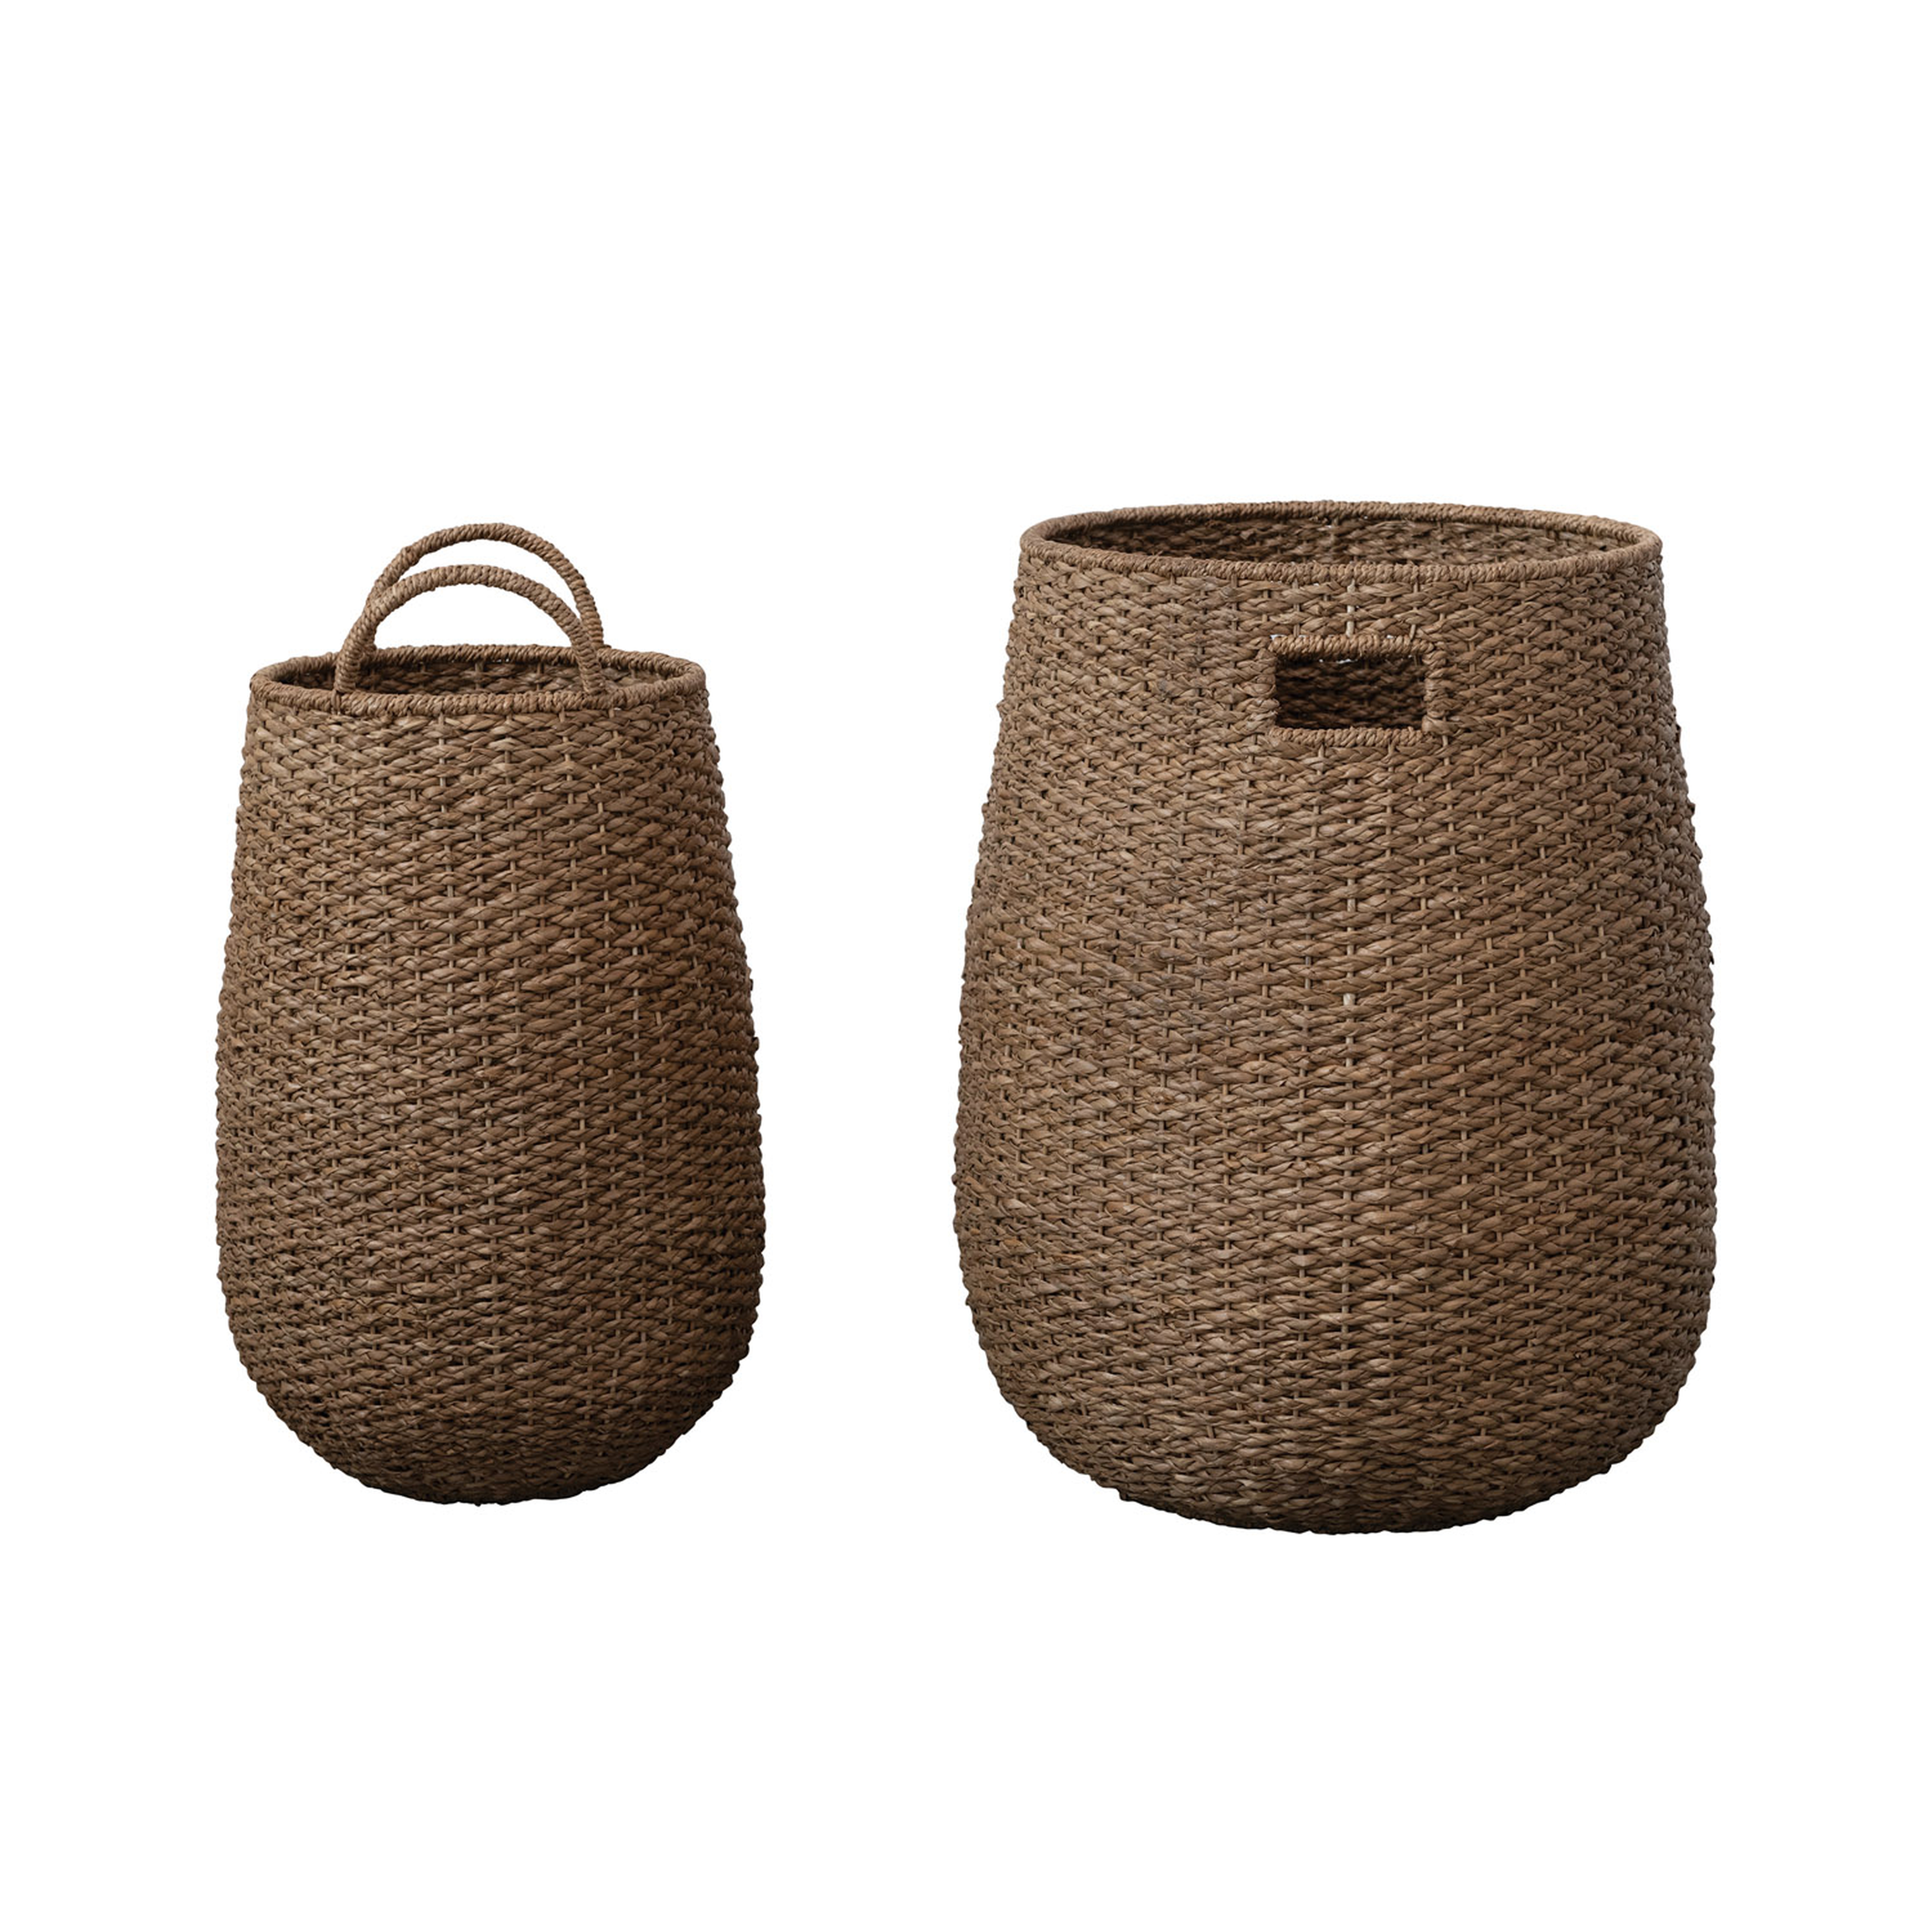 Hand-Woven Bankuan and Rattan Baskets with Handles, Set of 2 - Moss & Wilder